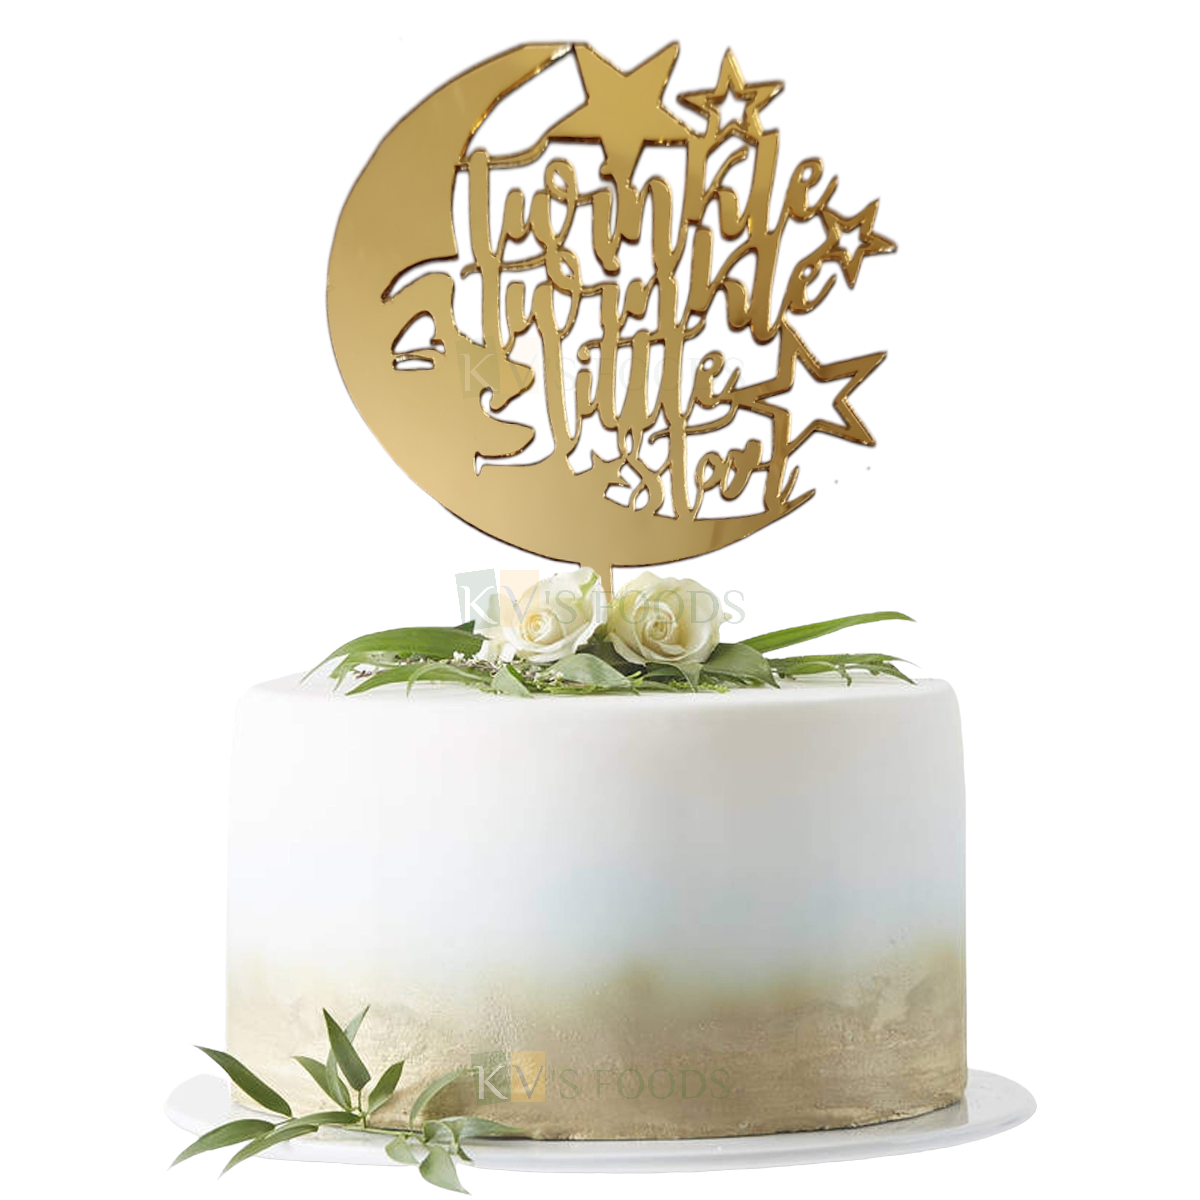 1PC Golden Acrylic Shiny Glass Finish Twinkle Twinkle Little Star with Moon and Stars Cake Topper, New Born Baby Shower Ceremony, Unique Elegant Font Design Cake Insert DIY Cake Decorations